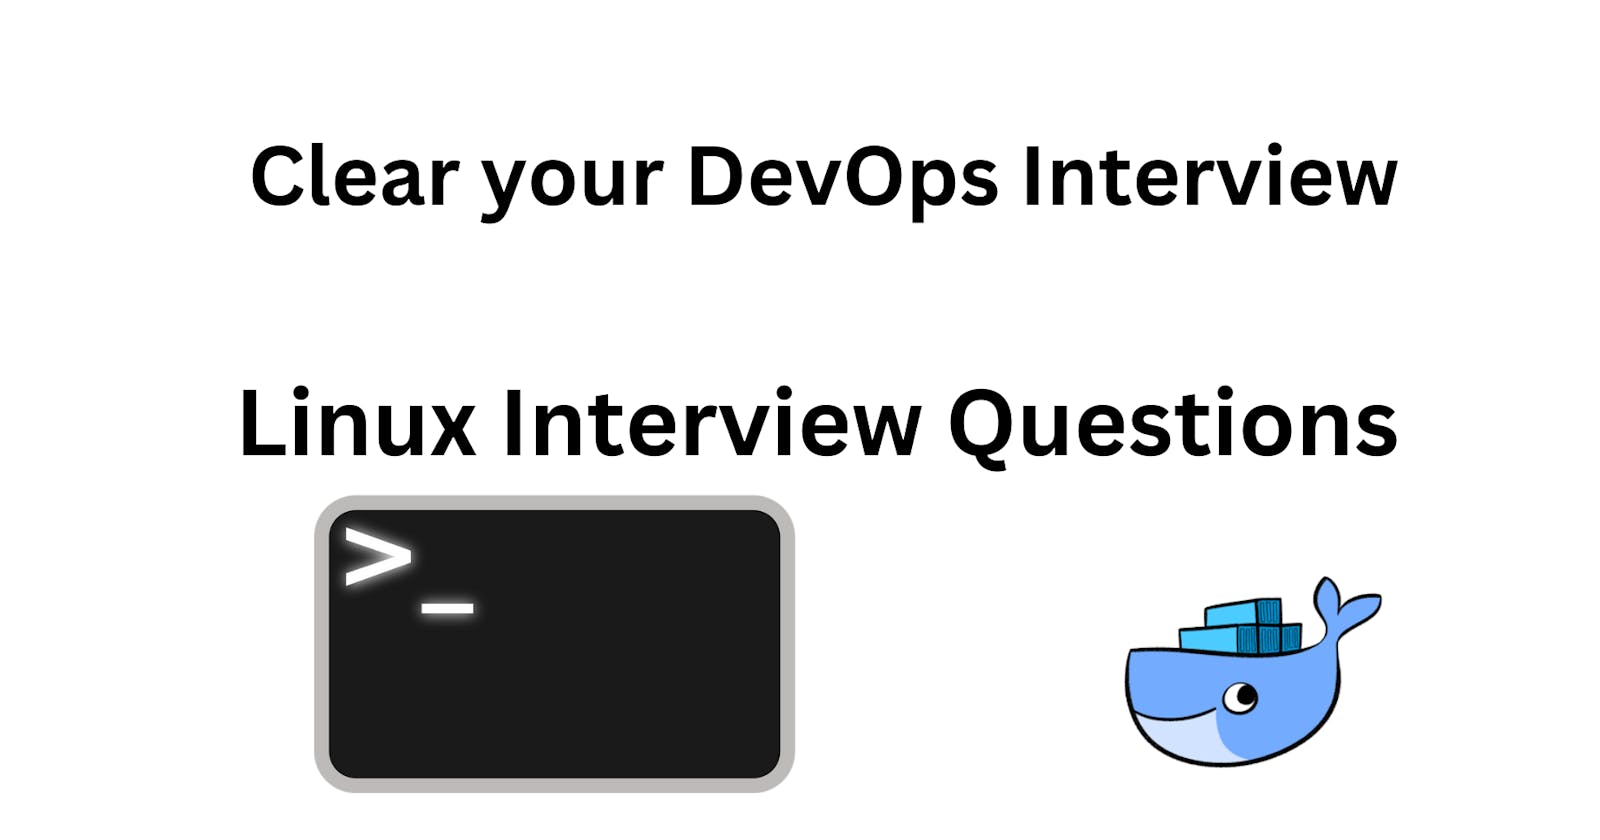 Linux Interview Questions for DevOps Interview